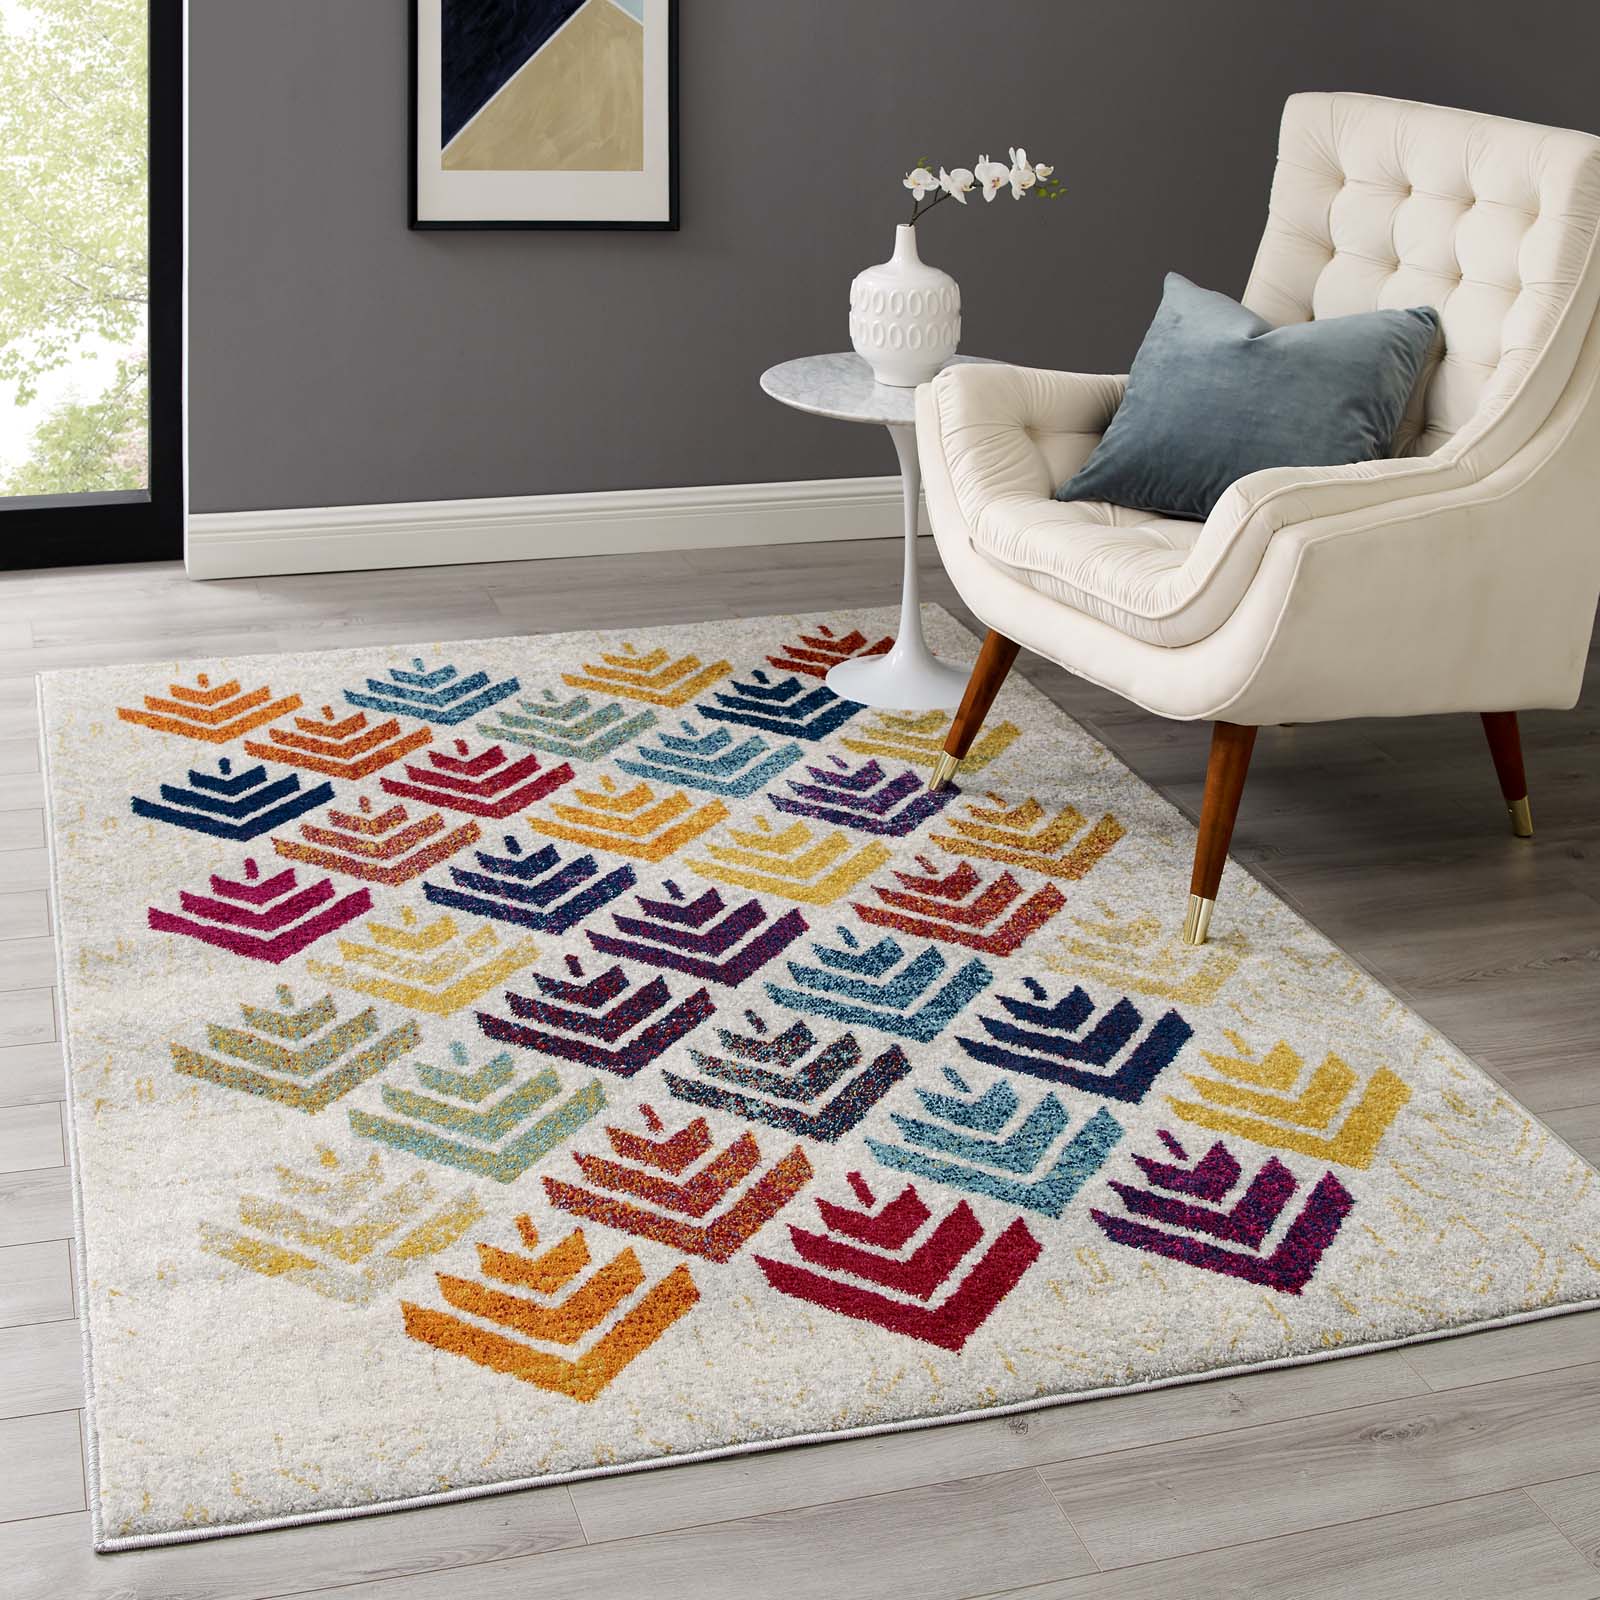 Entourage Florin Abstract Floral Area Rug - East Shore Modern Home Furnishings